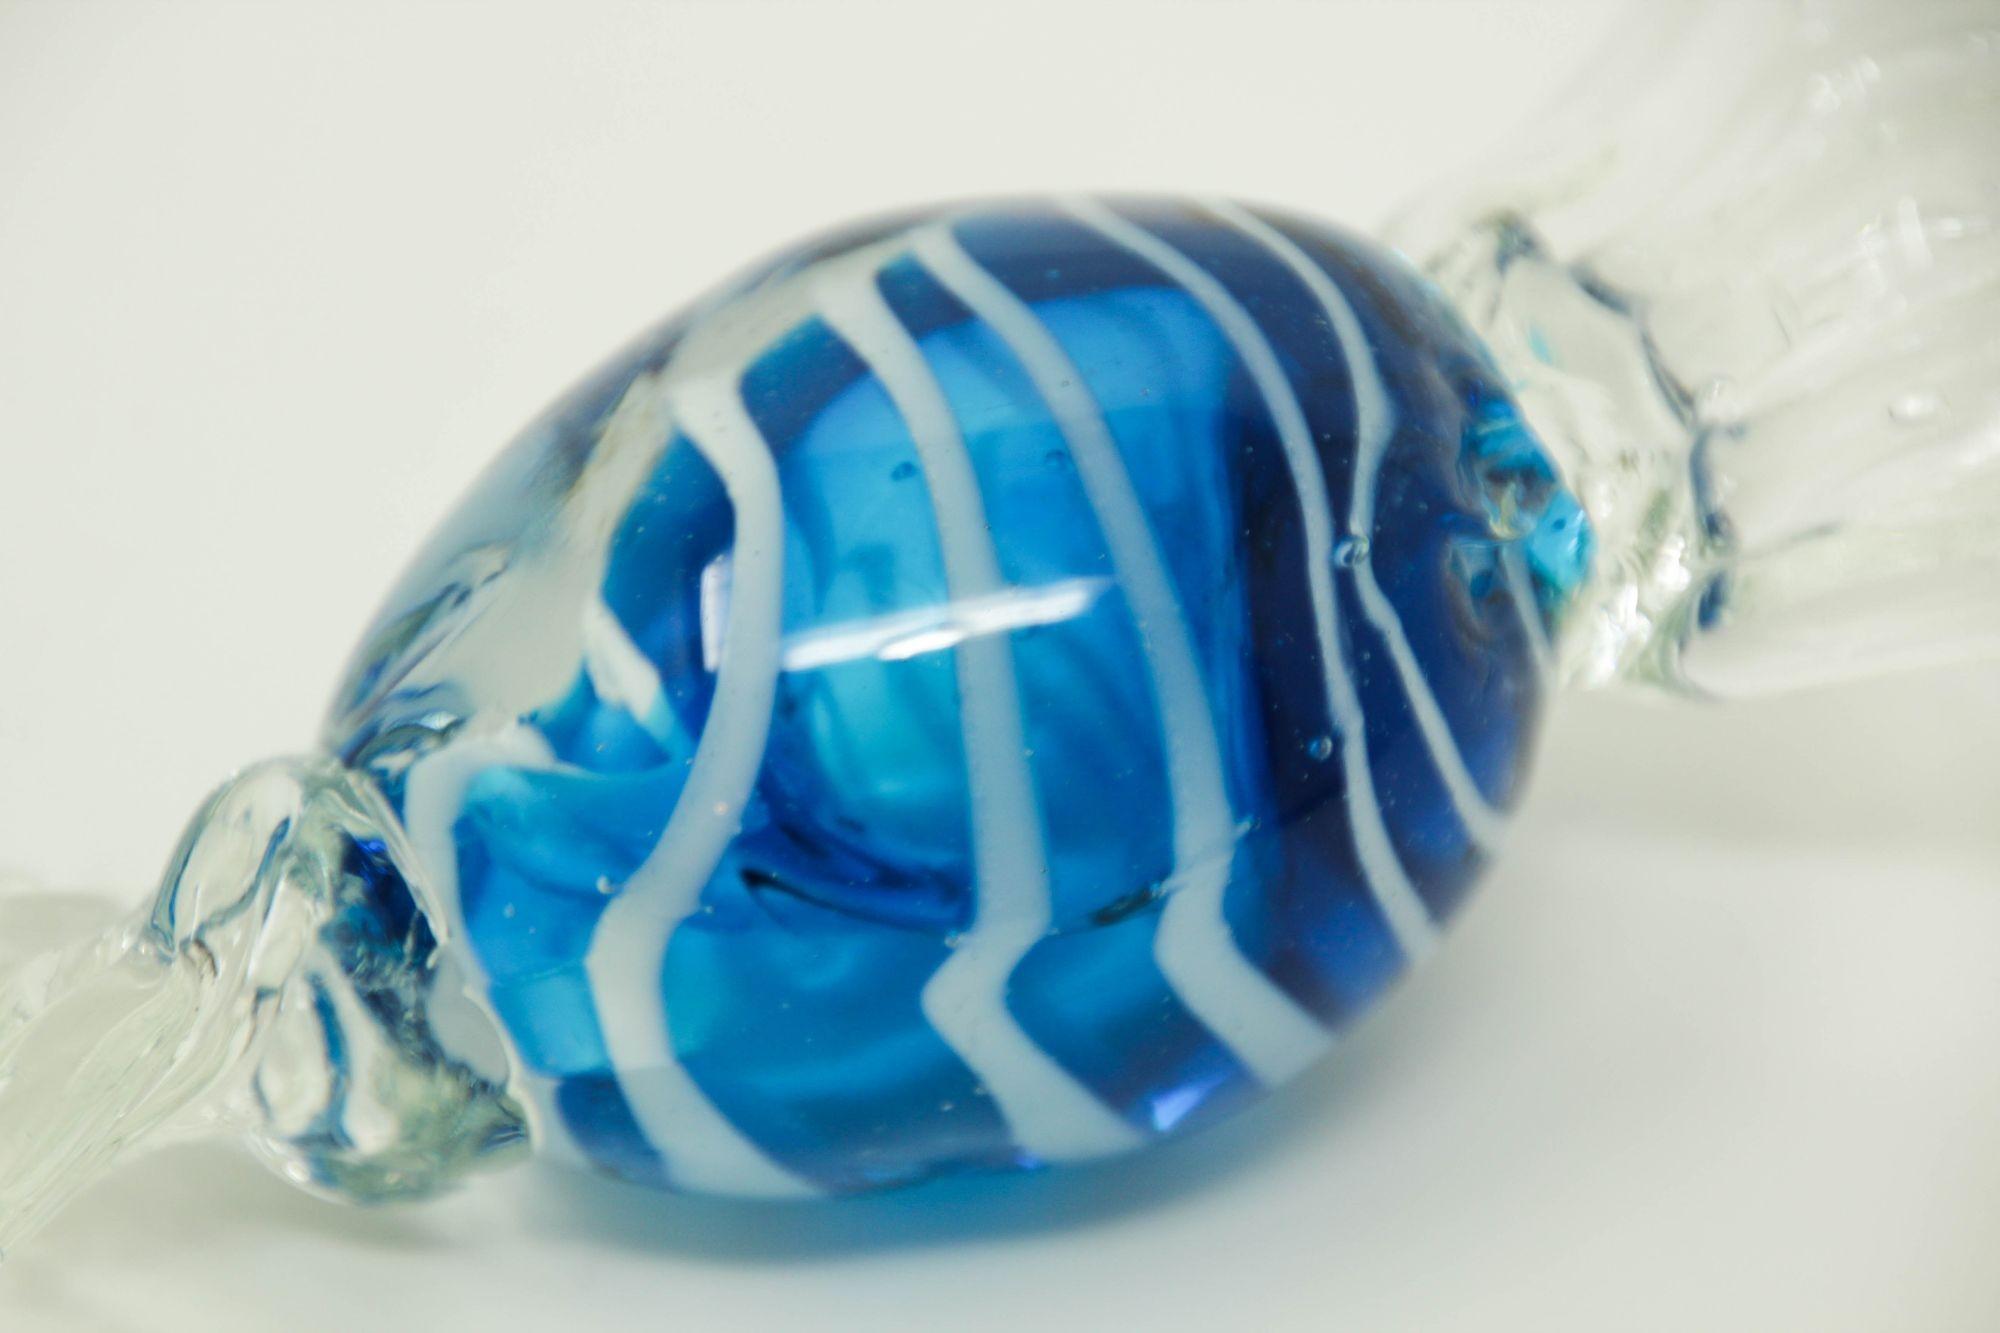 Vintage Large Murano decorative blown art glass wrapped blue hard candy paperweight.
Hand blown blue art glass hand crafted in Italy paperweight candy sculpture.
Vintage oversized Murano blue blown glass candy sculpture of candy wrapped in